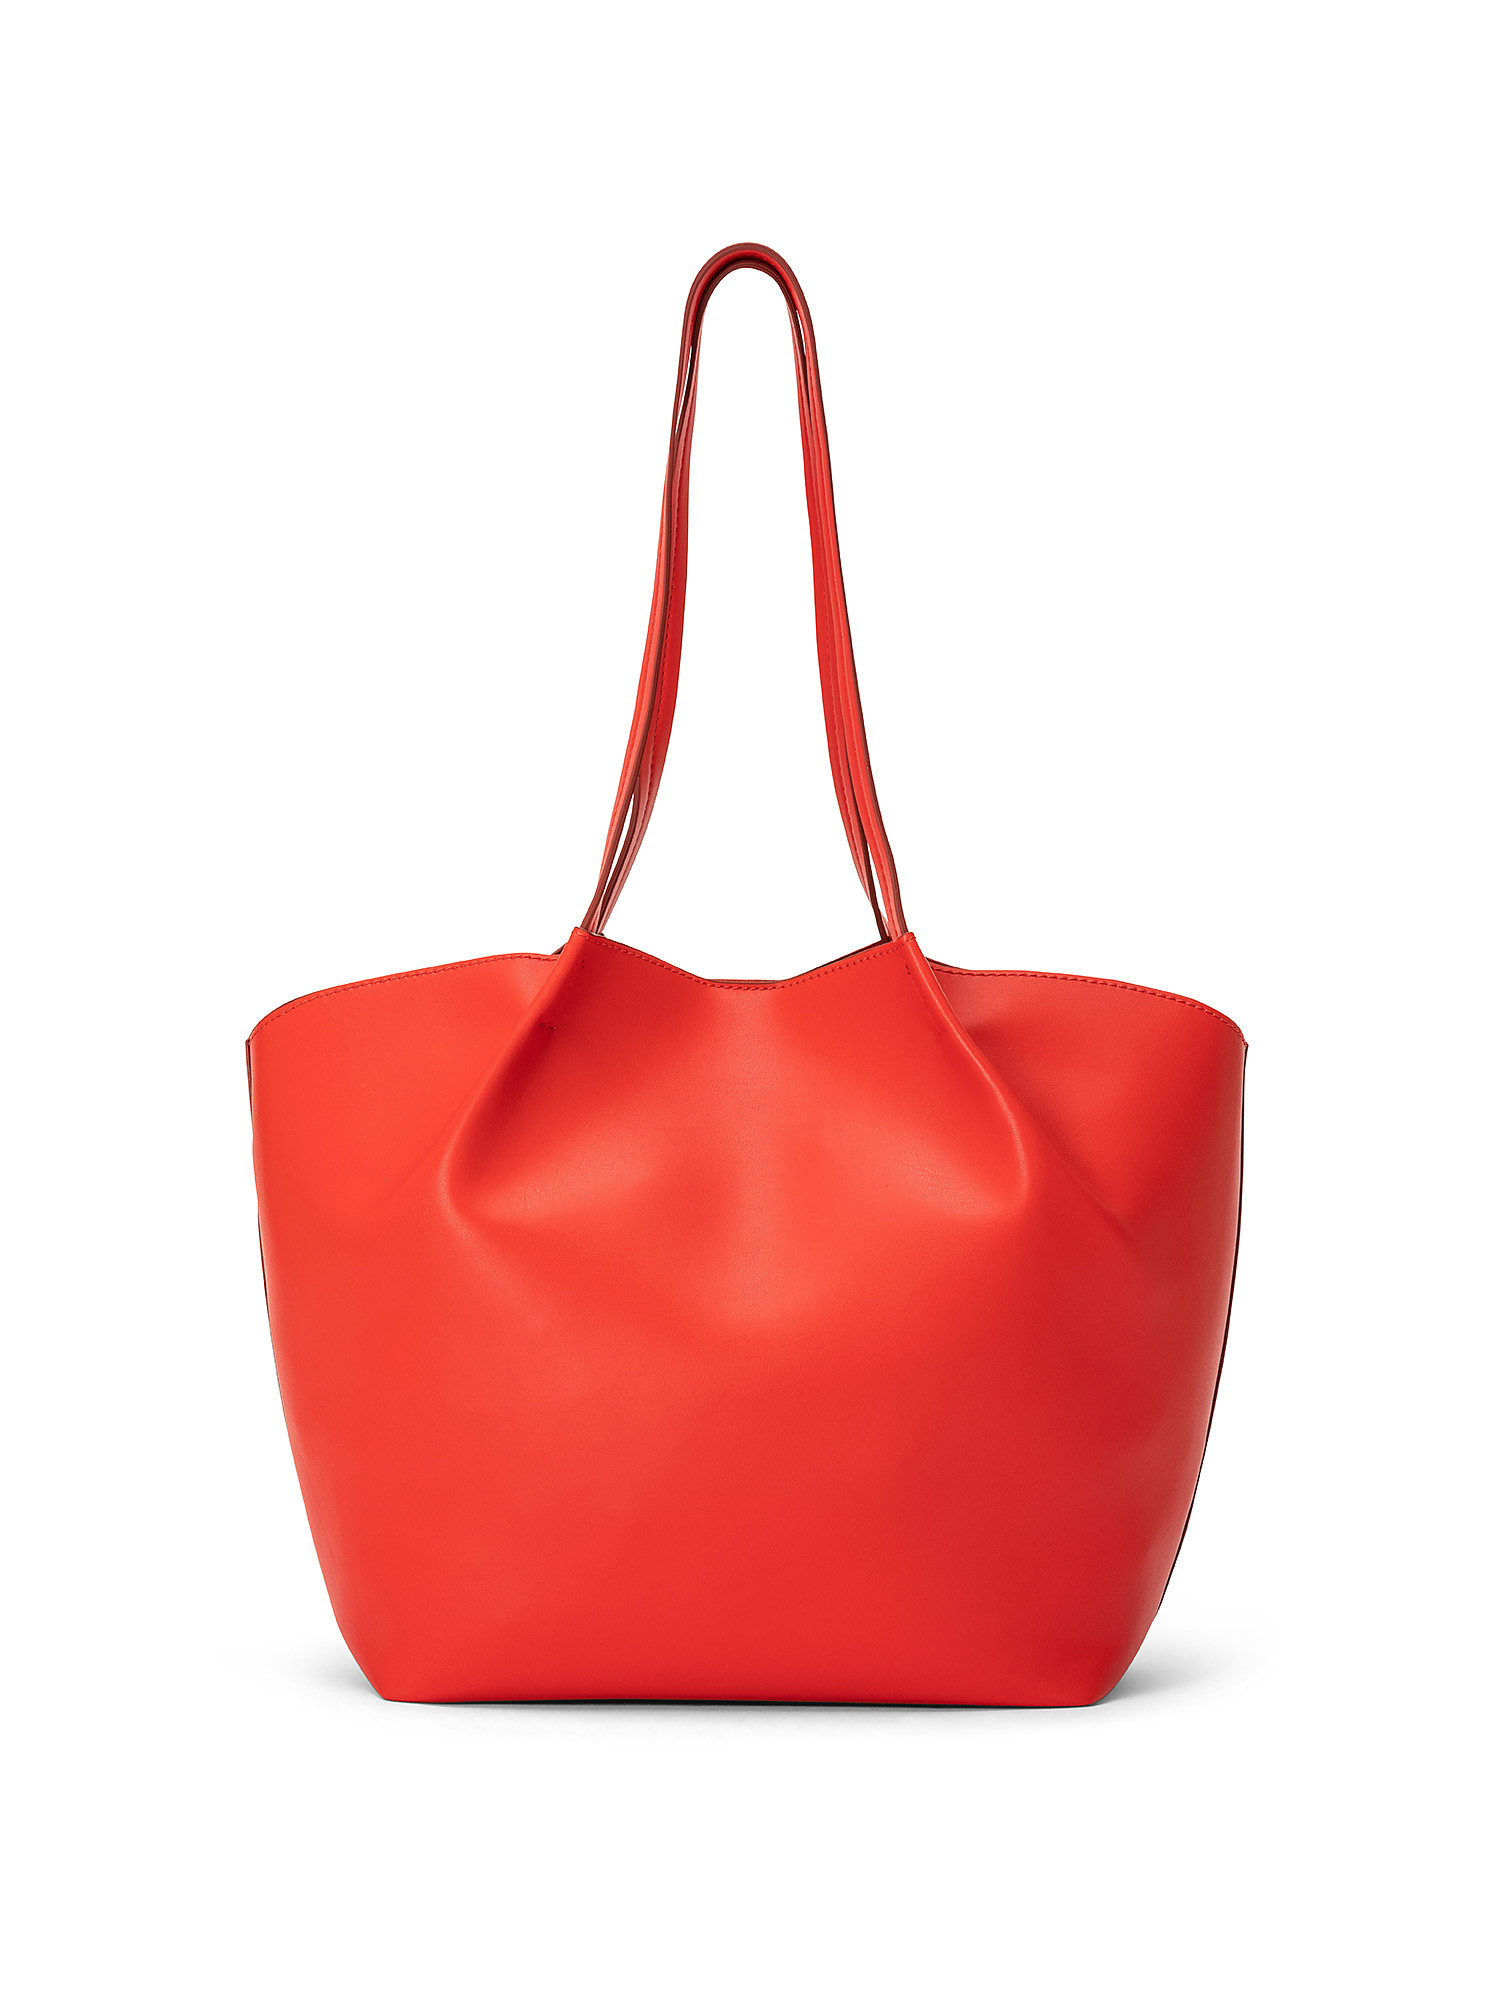 Tote bag, Rosso, large image number 0